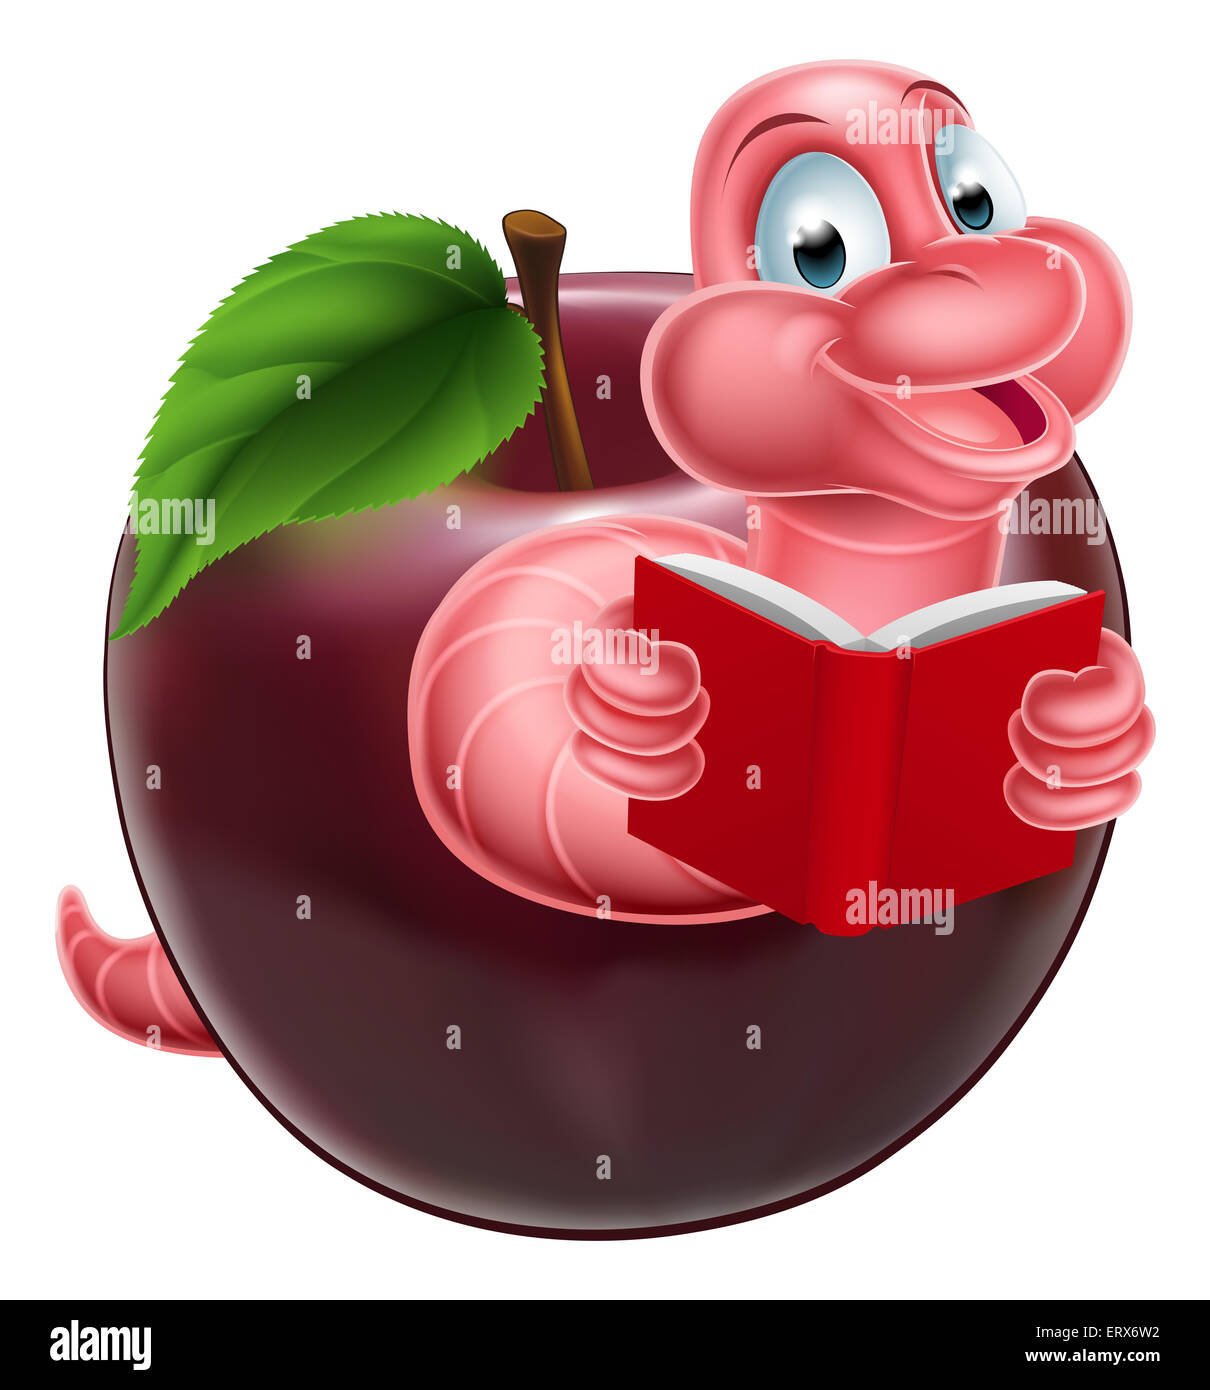 A happy smiling cute pink cartoon caterpillar worm bookworm coming out of an apple and reading a book Stock Photo